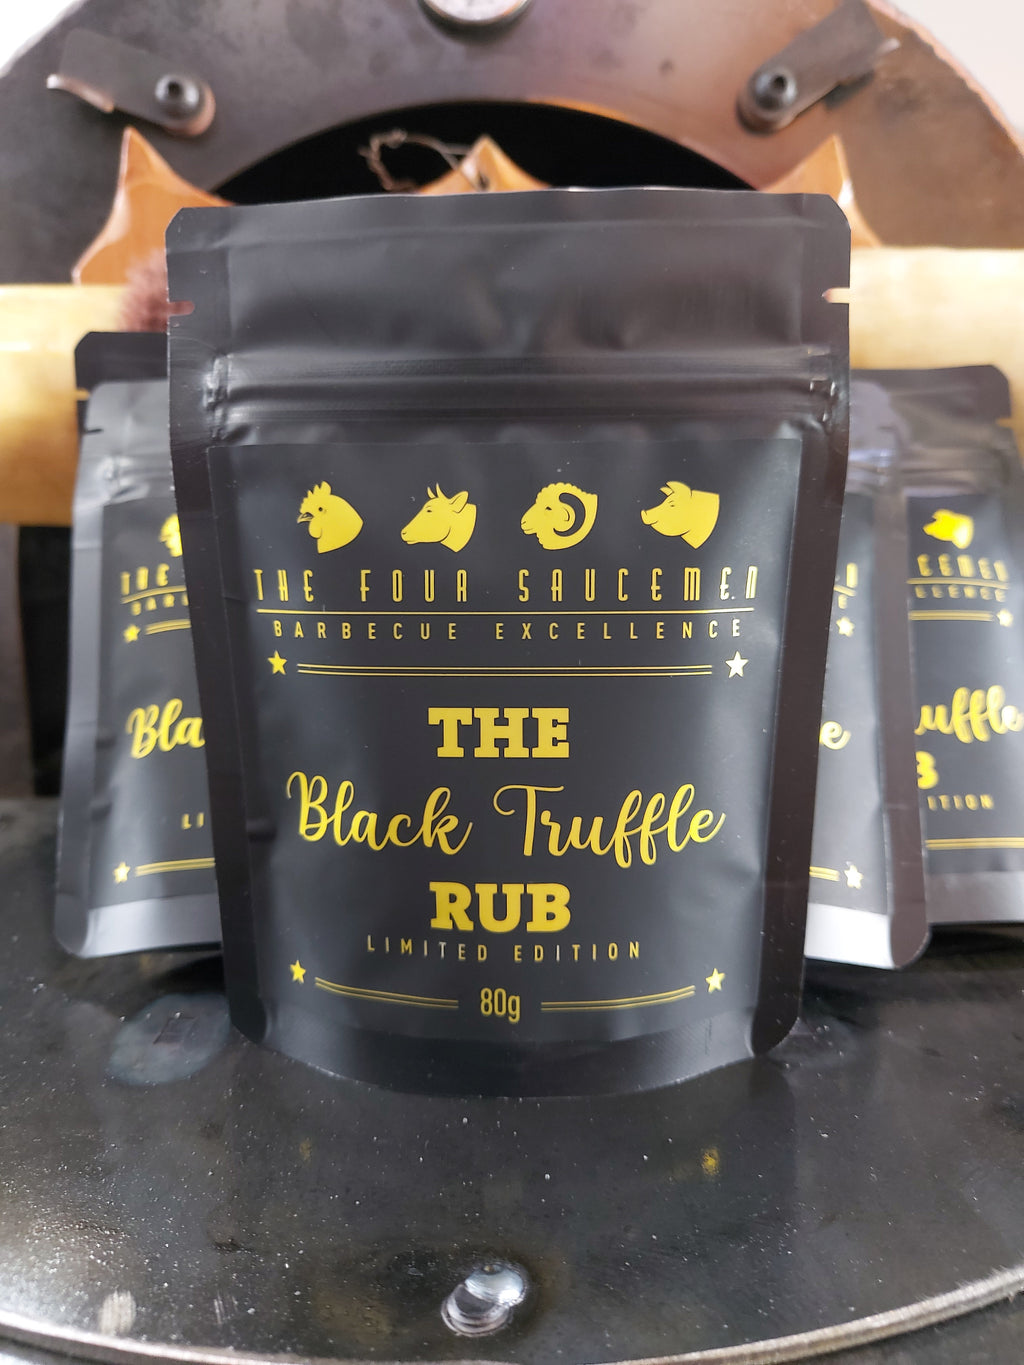 The Black Truffle Rub 80gm by The Four Saucemen